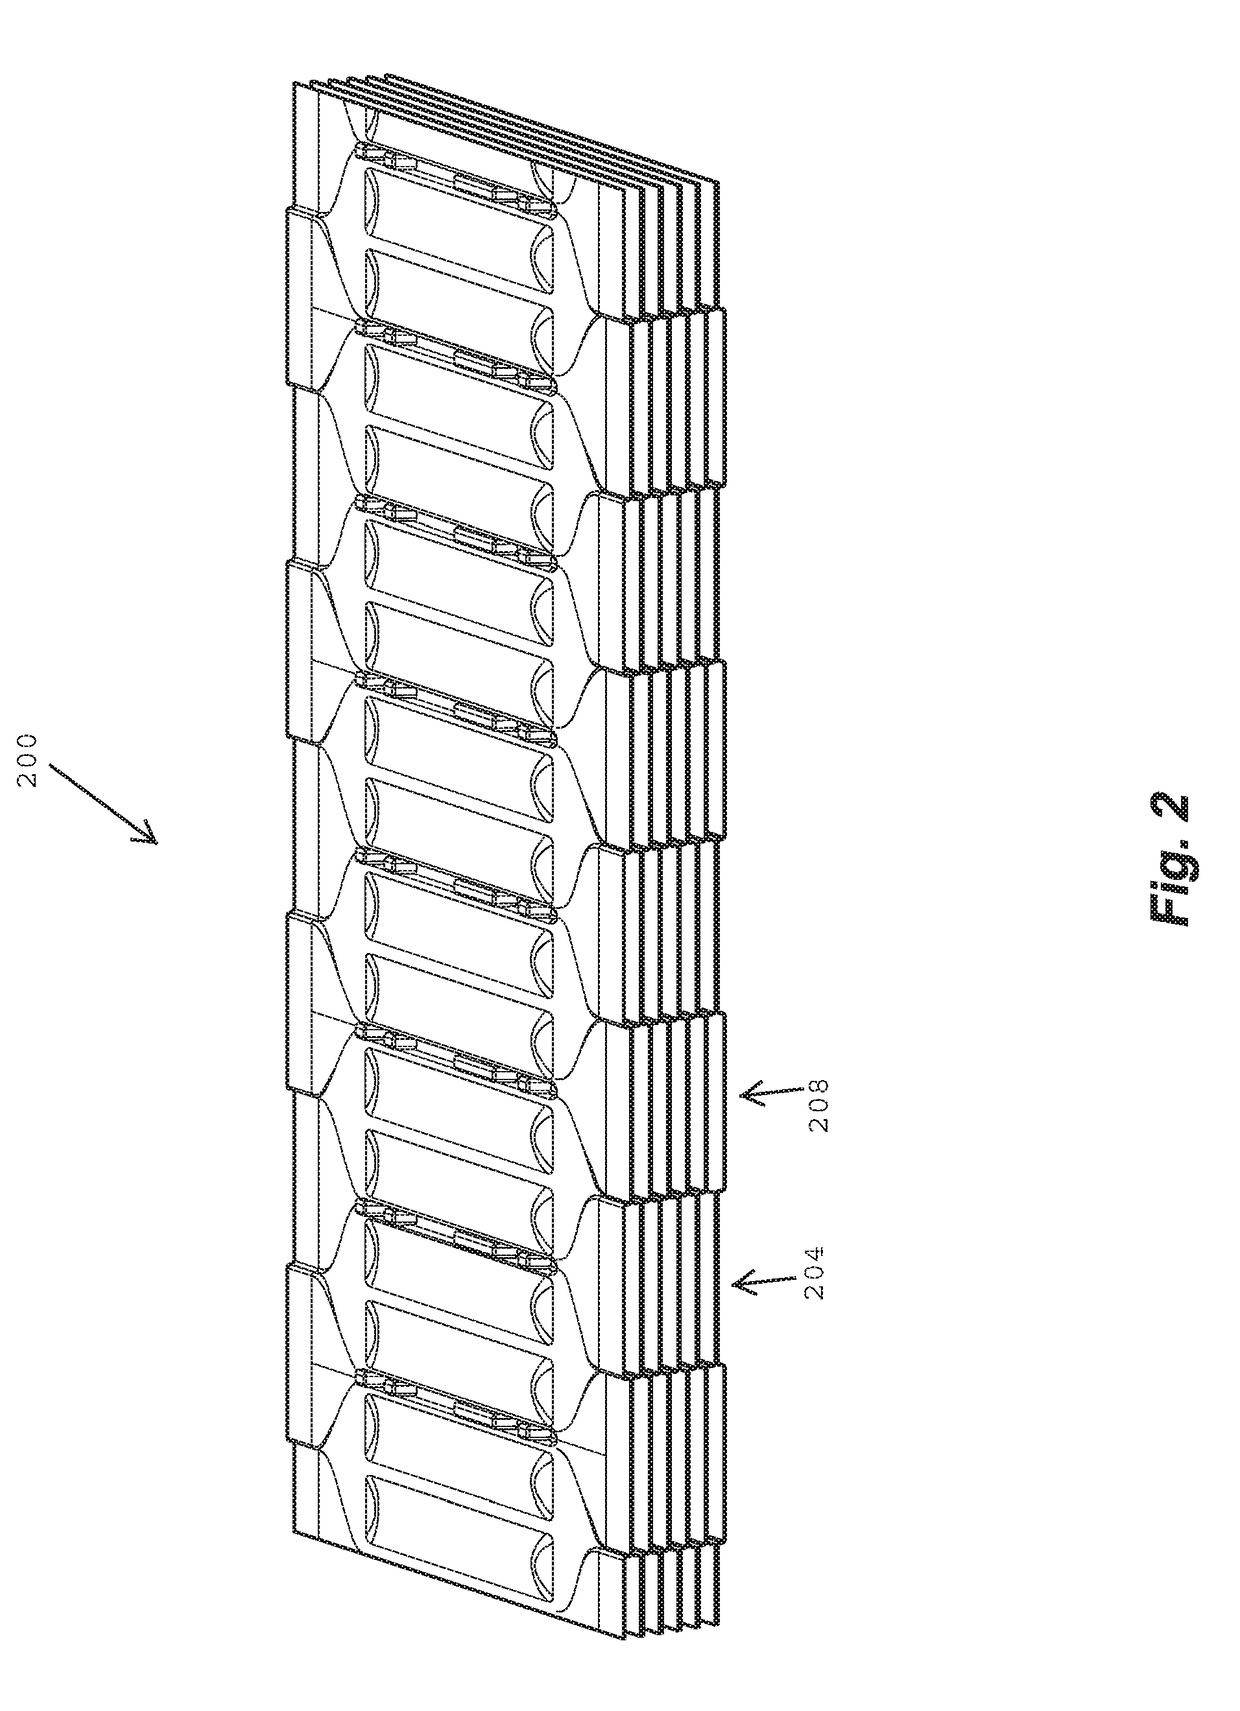 Method of producing a micro-core heat exchanger for a compact indirect evaporative cooler